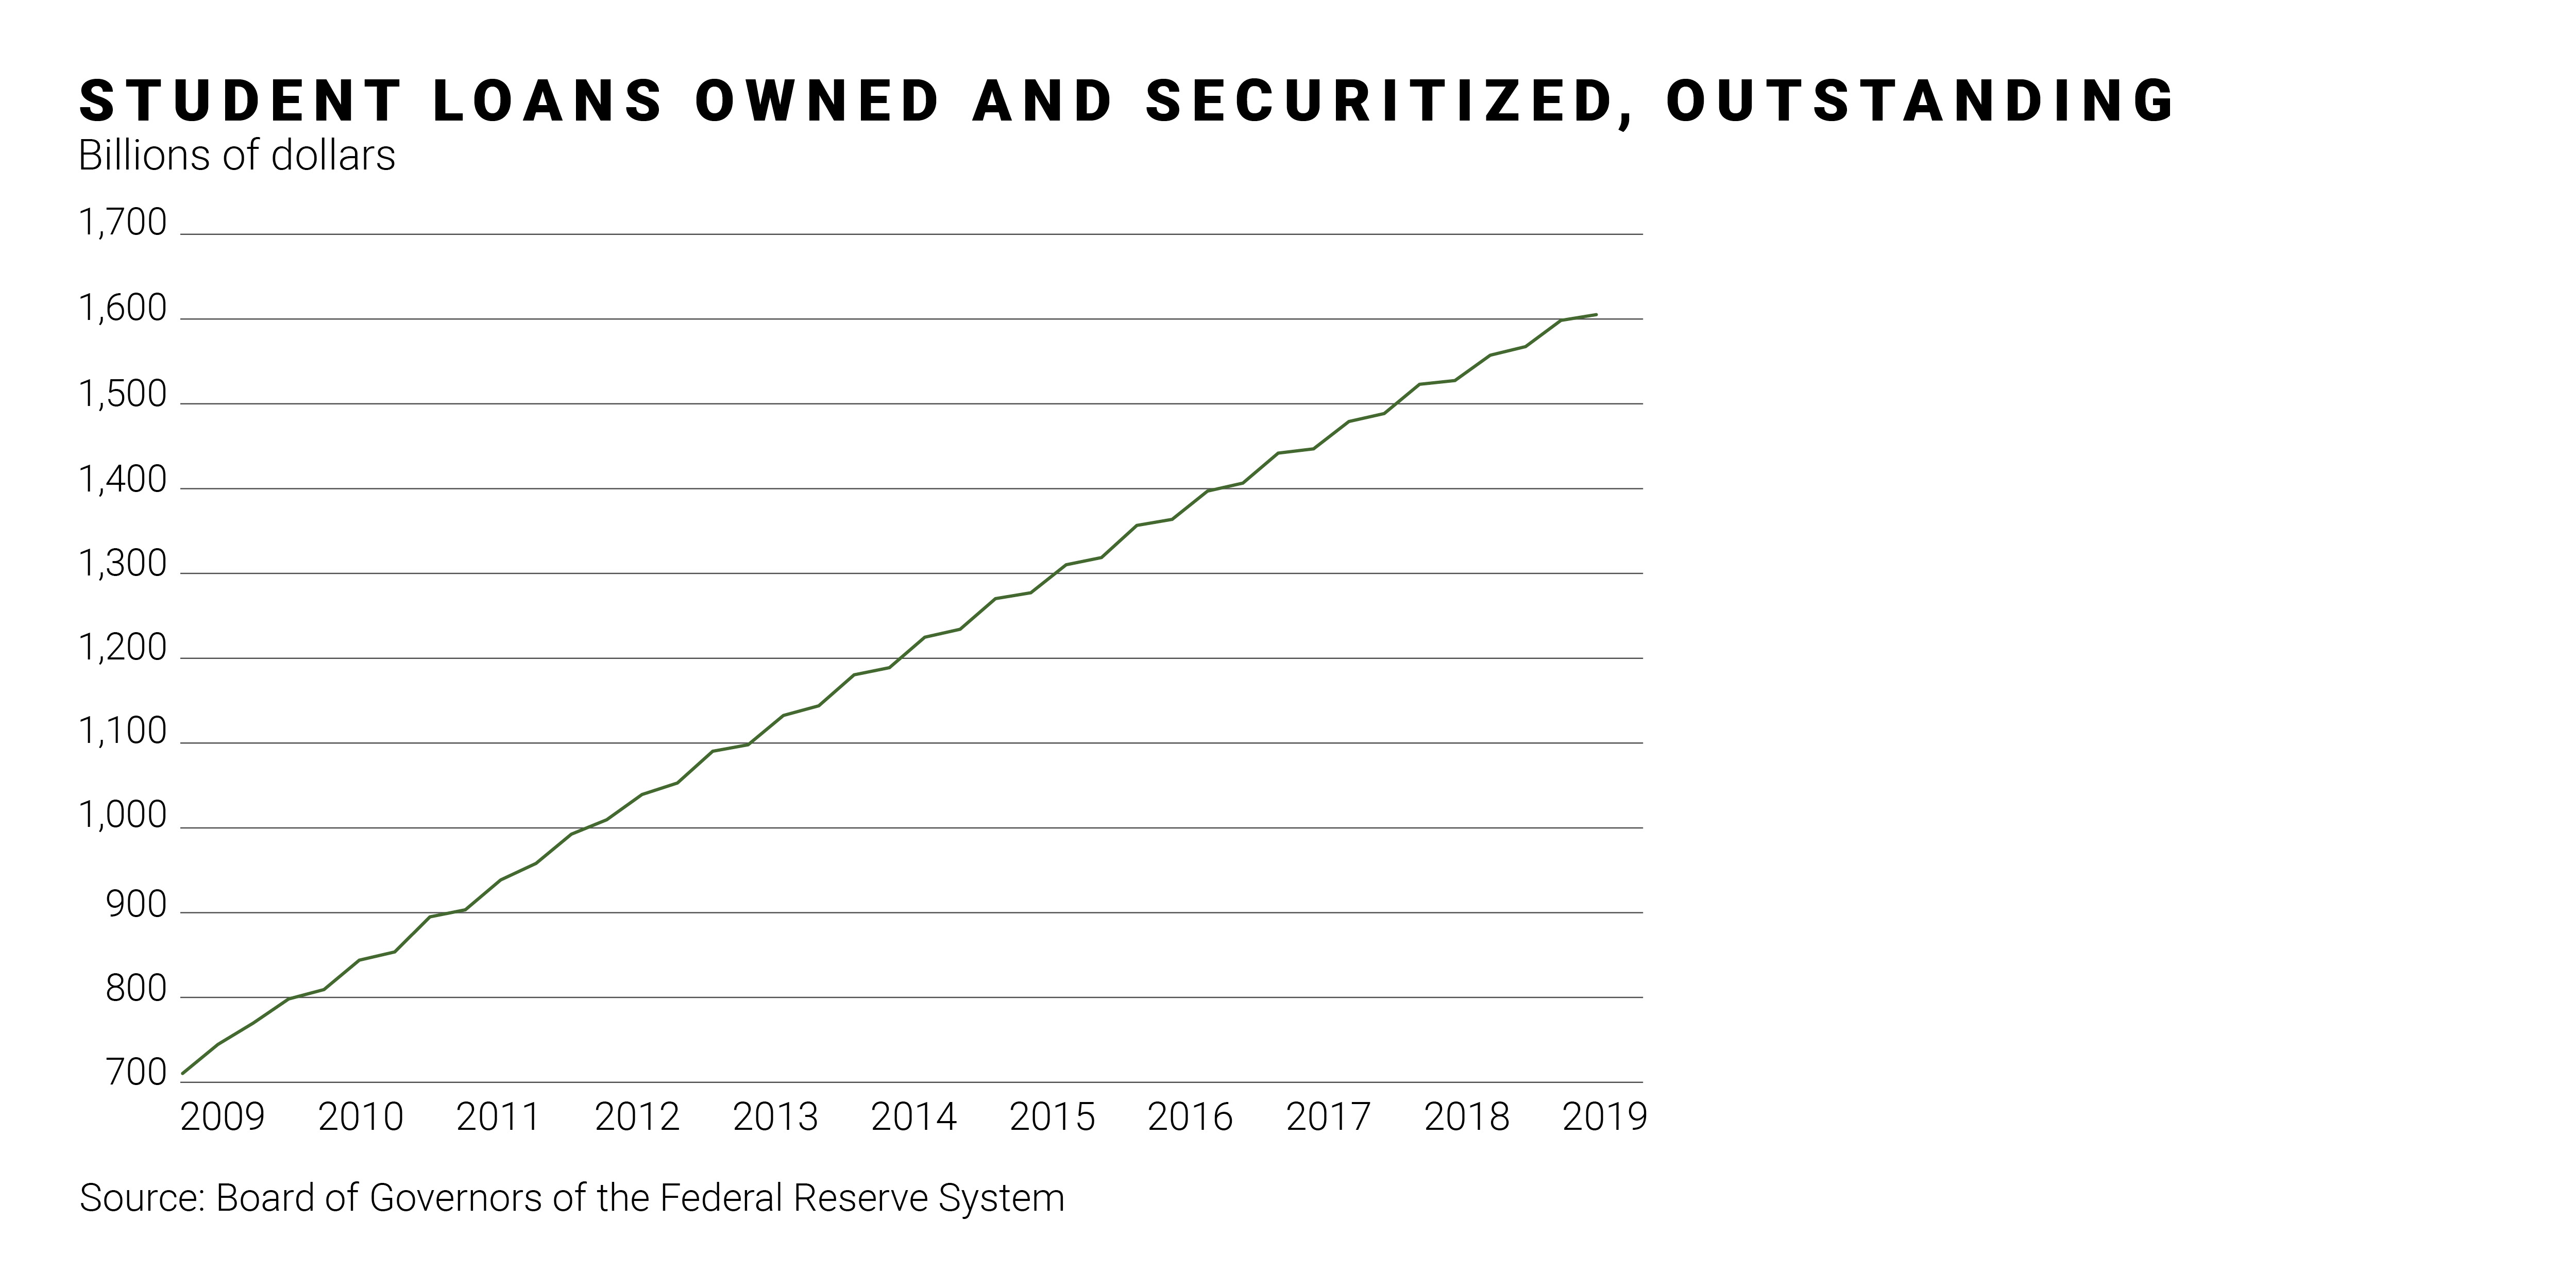 Student Loans Owned and Securitized, Outstanding